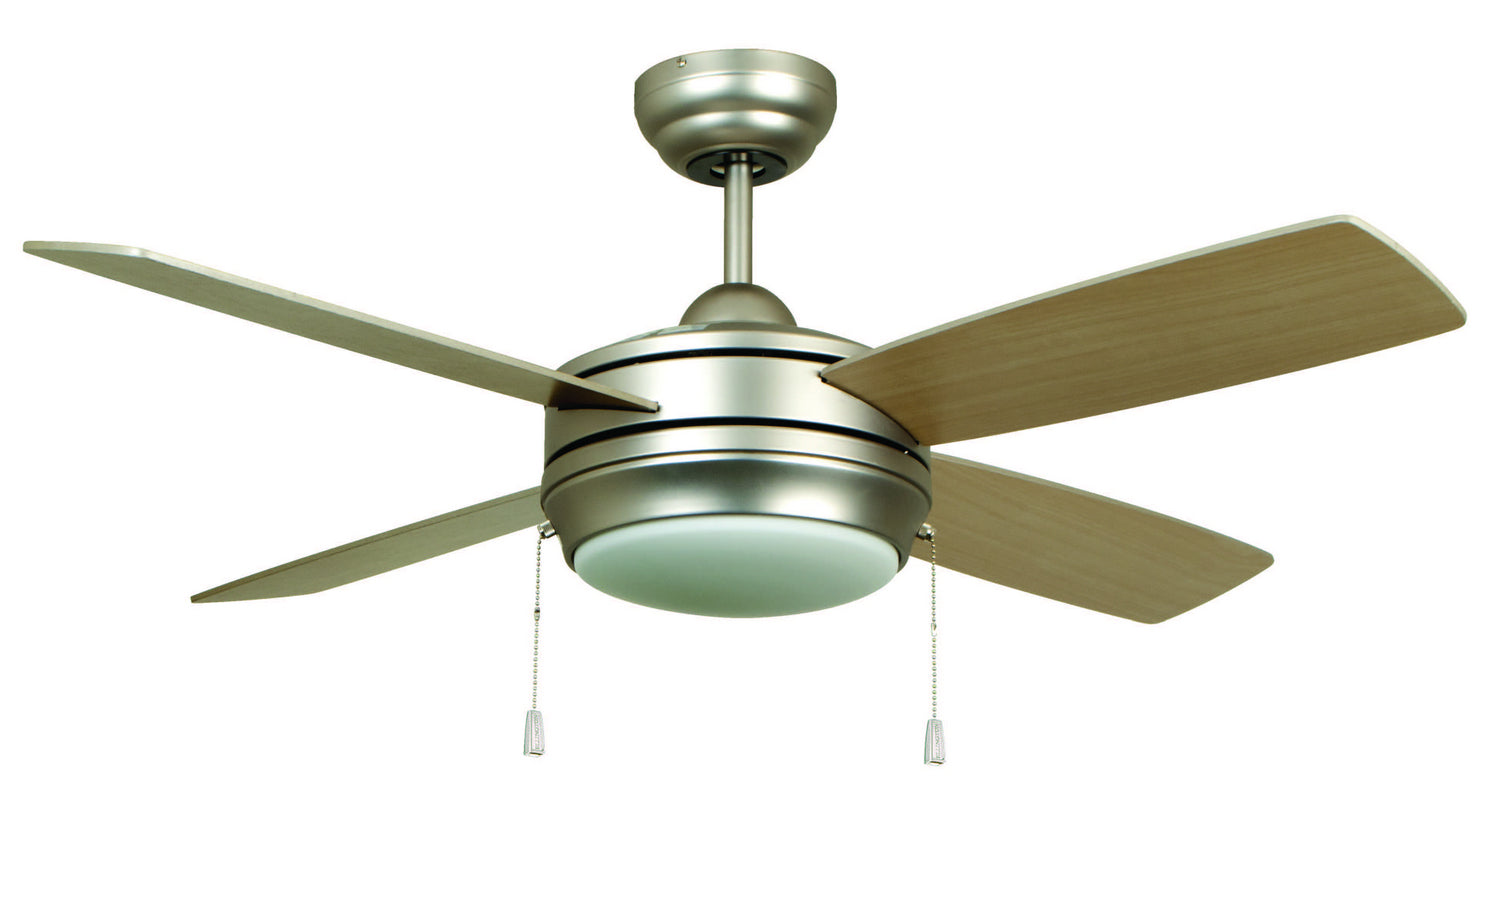 Craftmade Laval - LAV52BN4LK-LED Ceiling Fan 52 Inch - Brushed Nickel, Maple